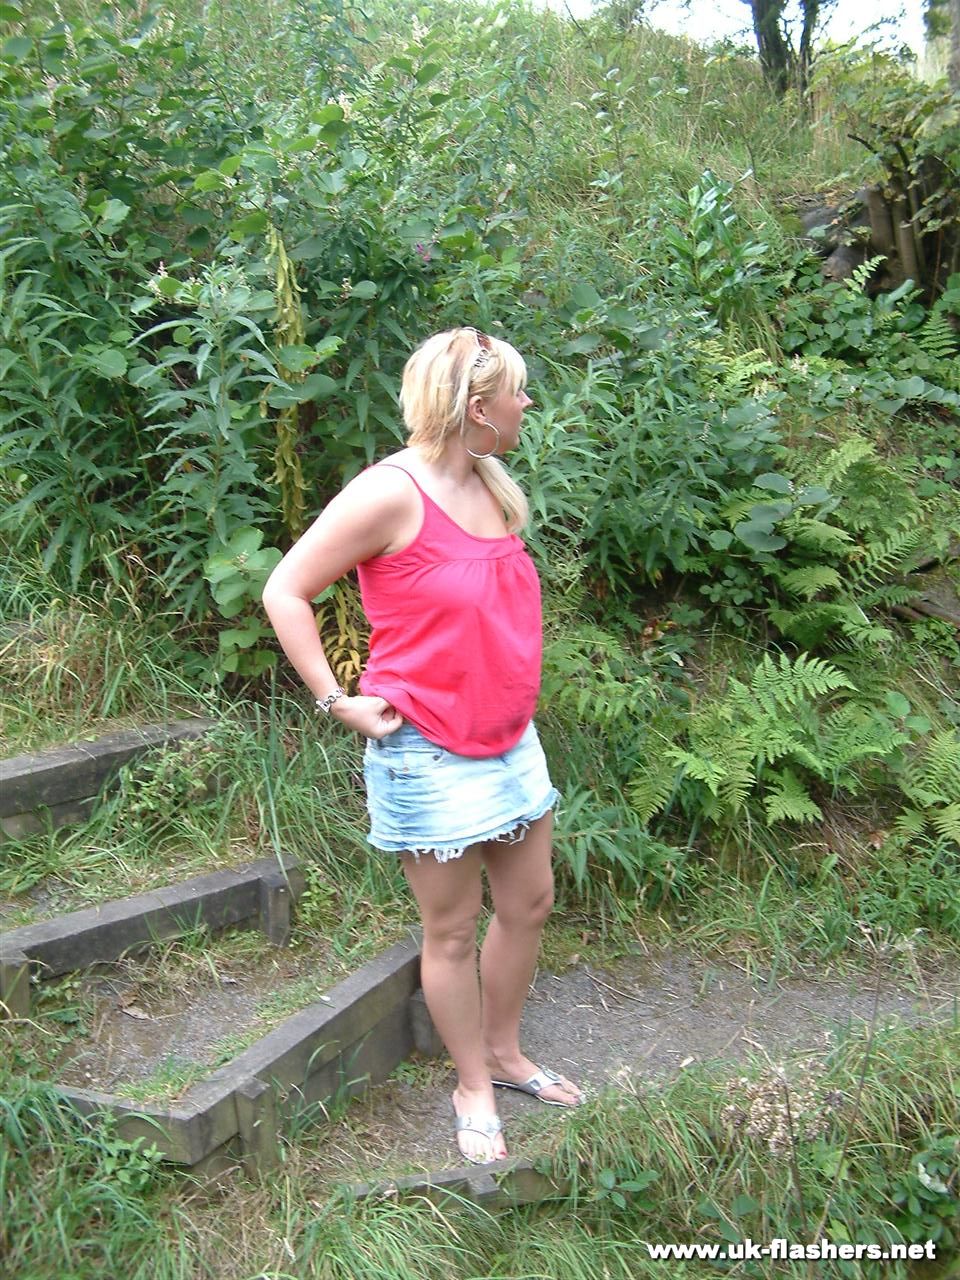 Overweight UK female with blonde hair strips naked on a popular walking trails foto porno #428021522